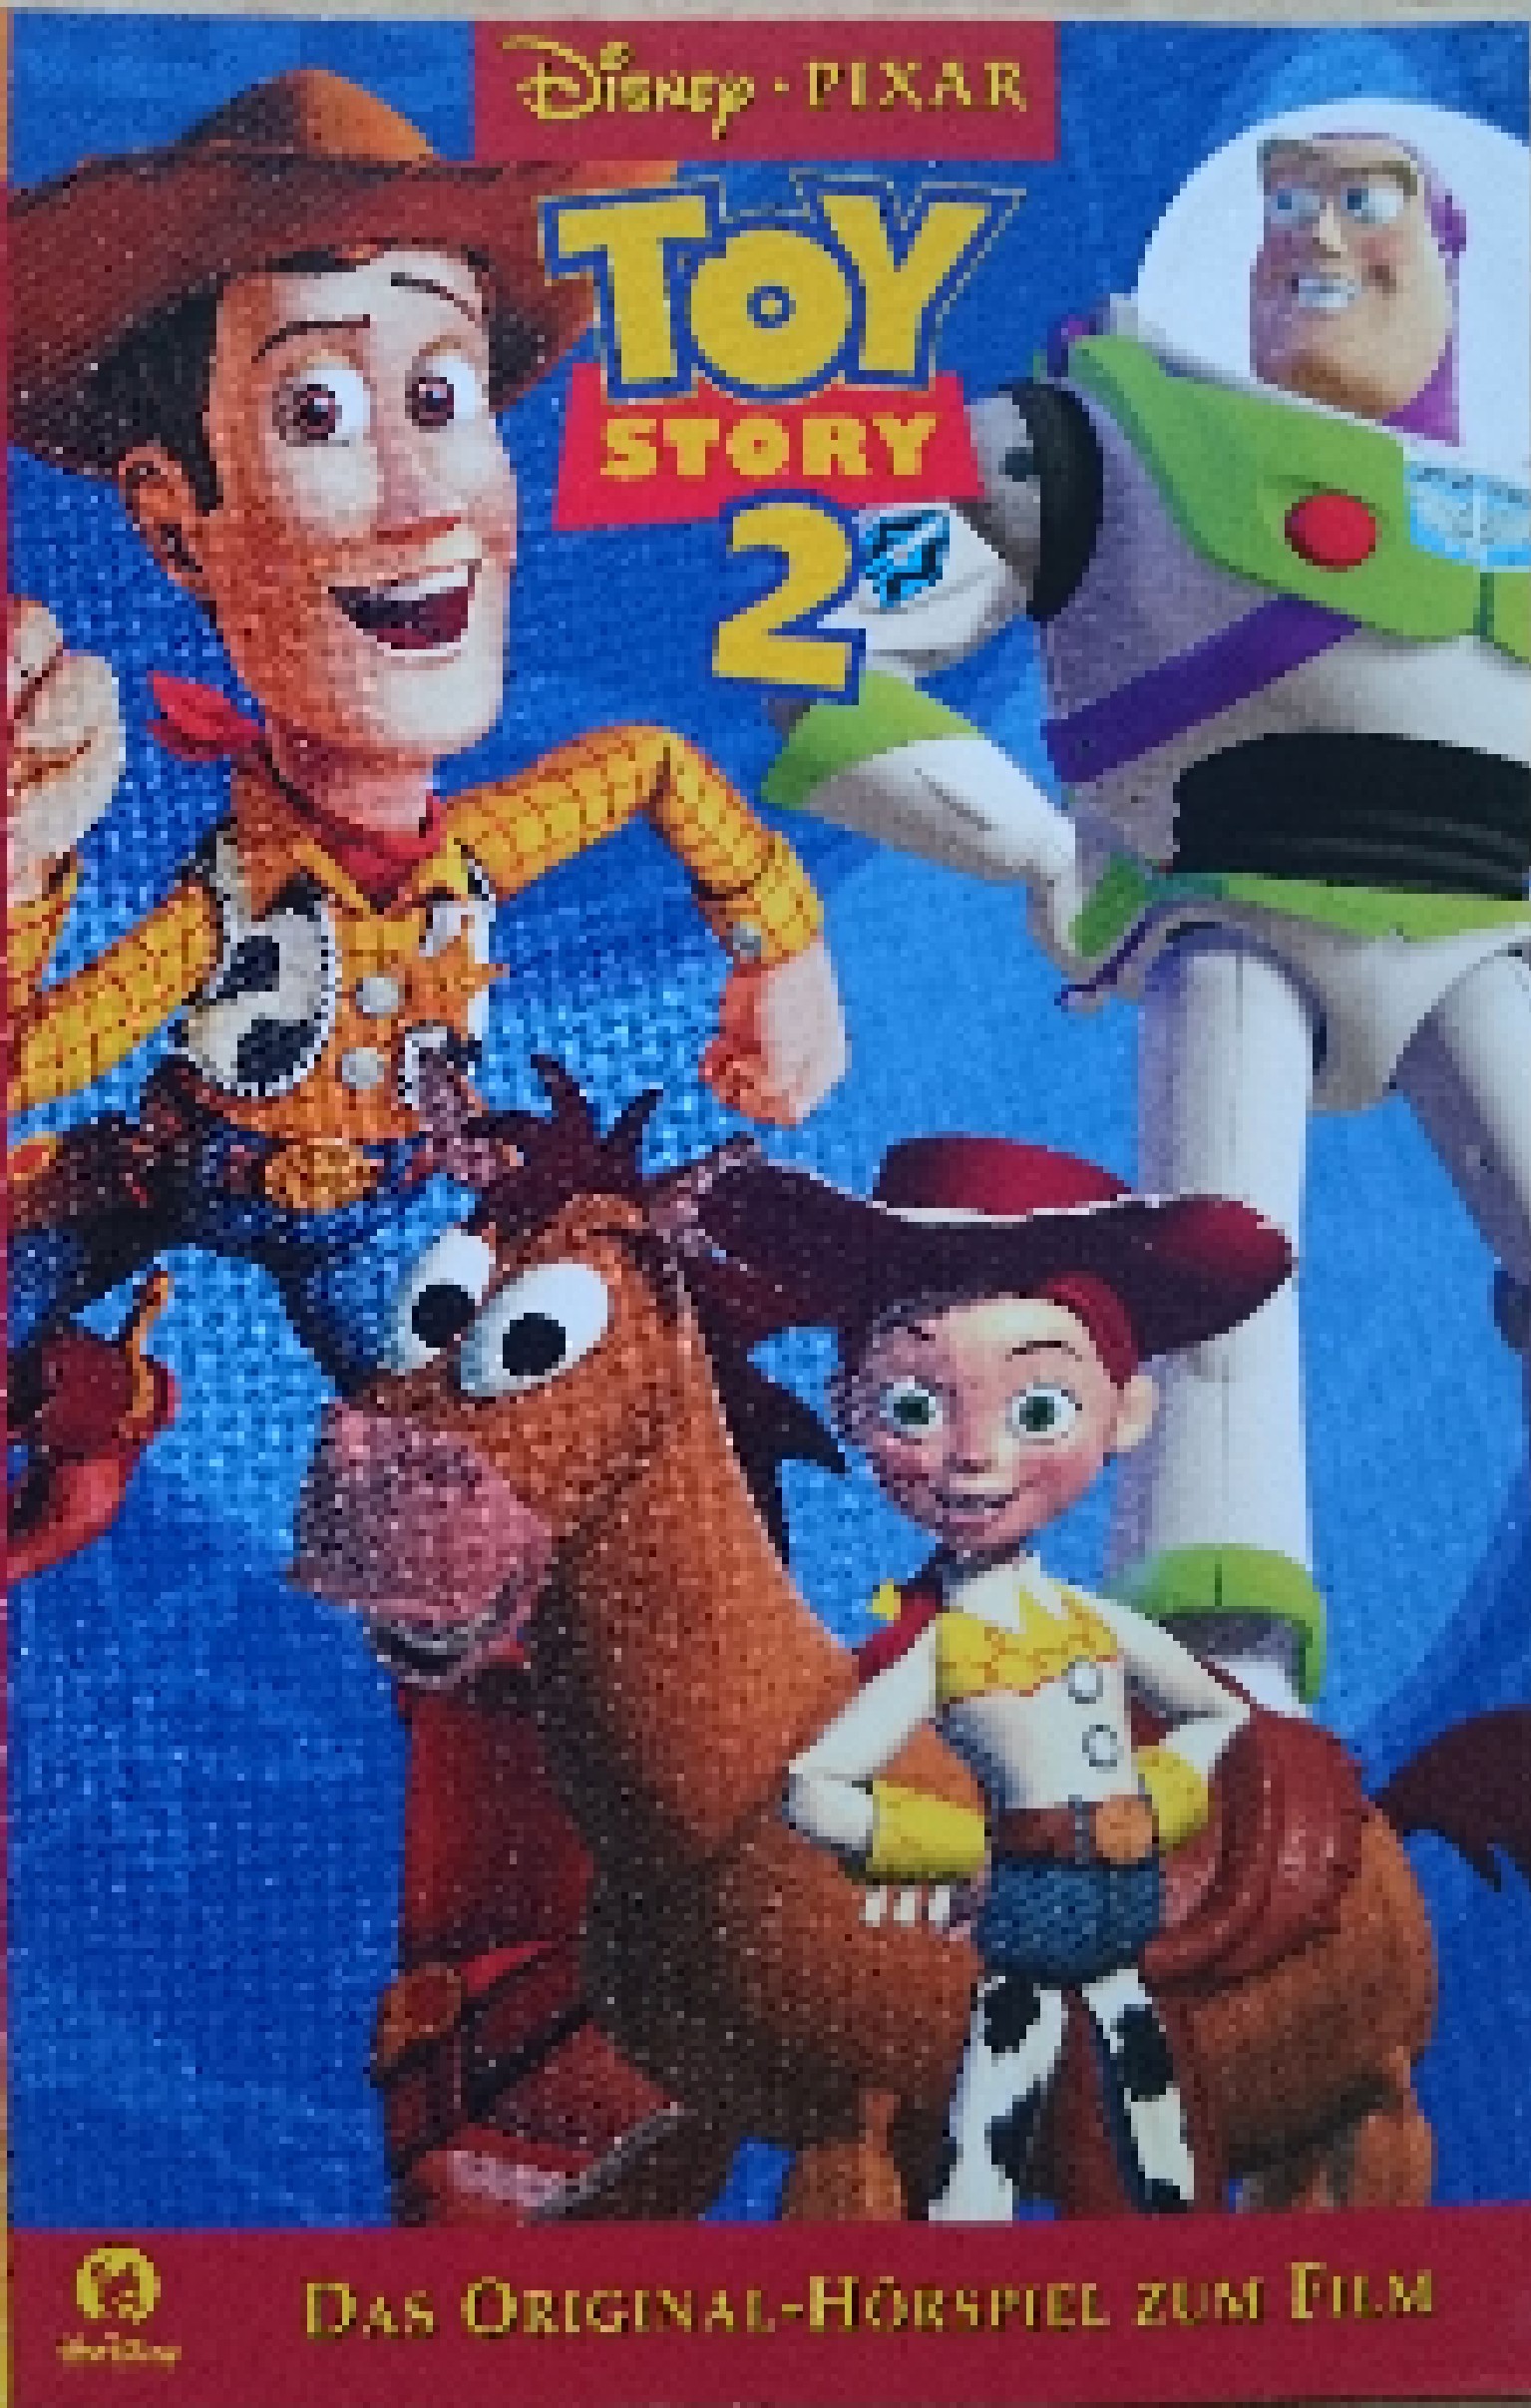 when was toy story 1 released